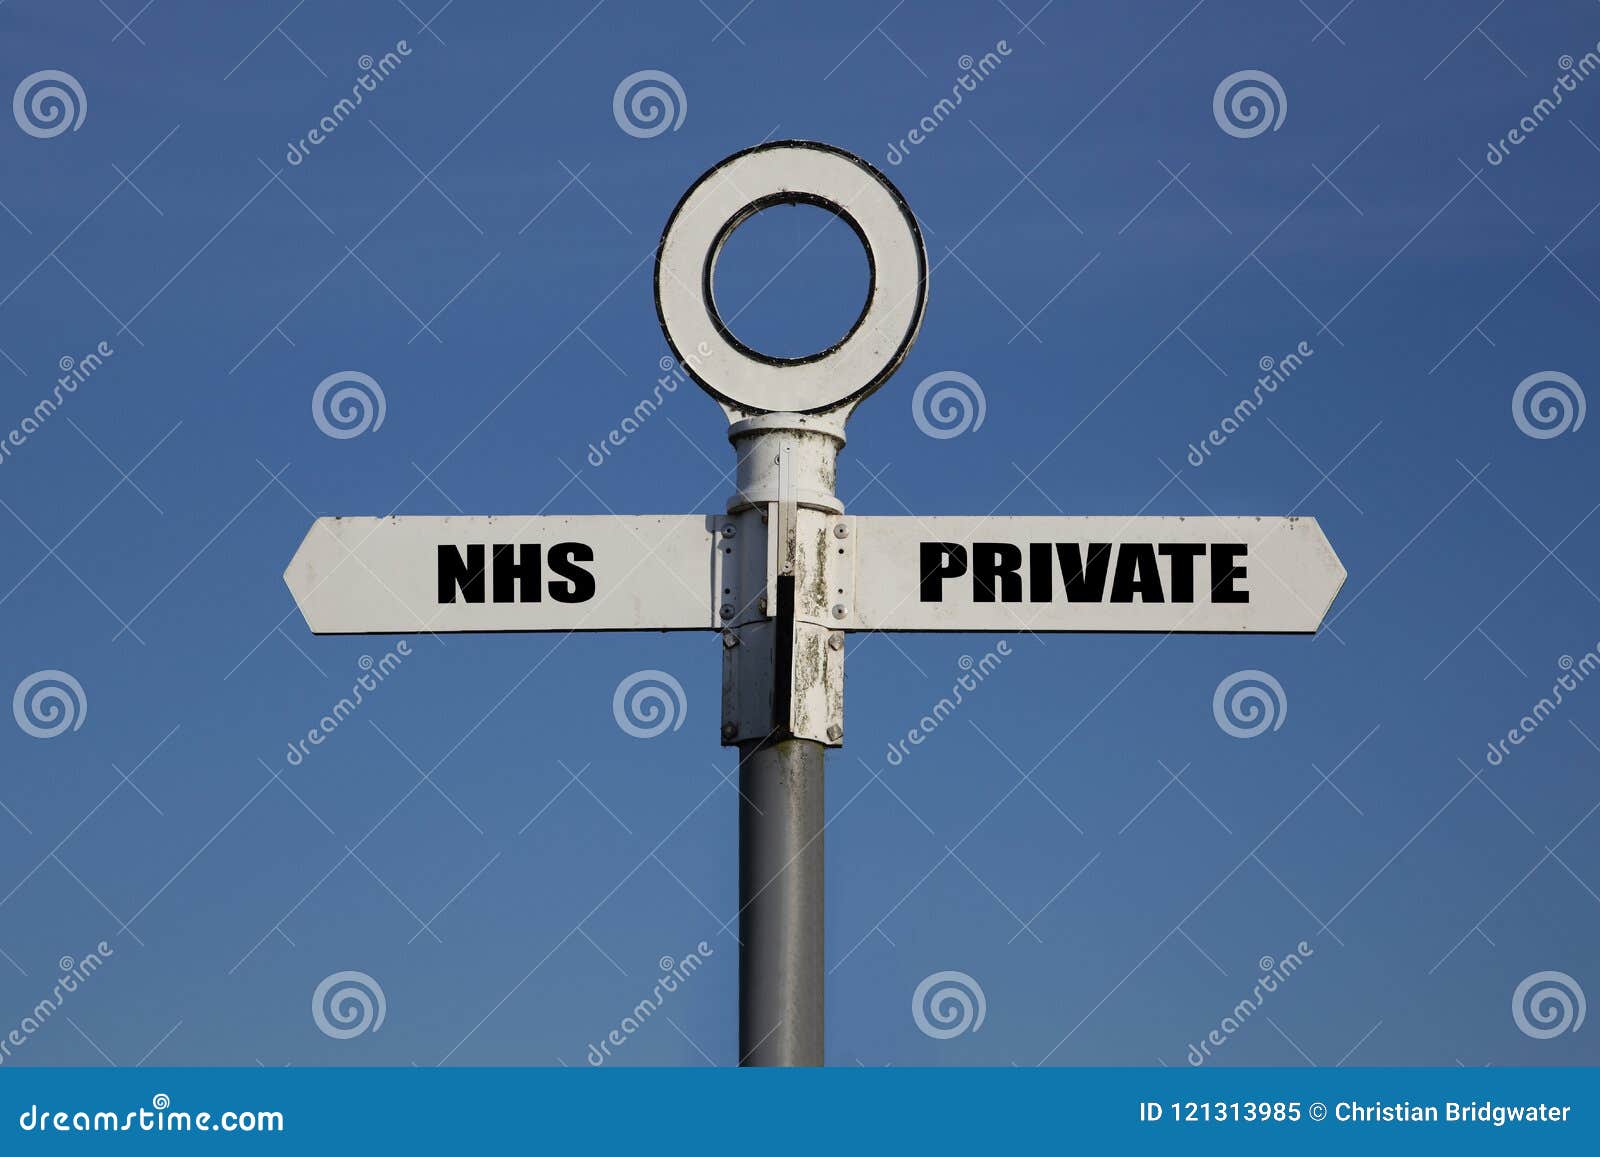 old road sign with nhs and private pointing in opposite directions